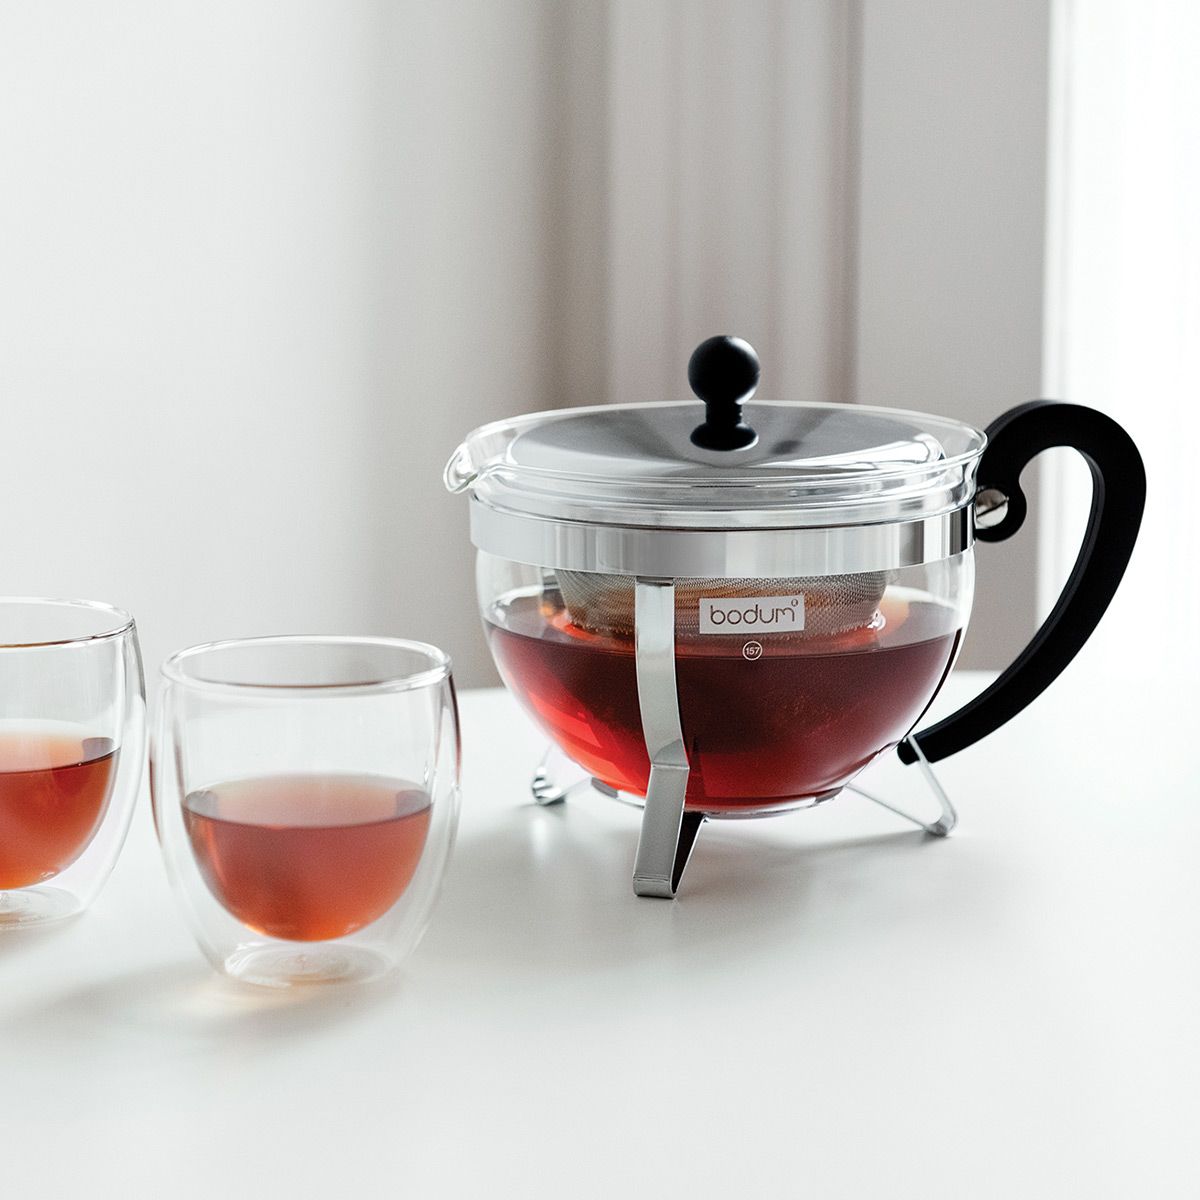 Bodum Chambord Tea Maker With Filter And Lid Chrome, 1.3 L